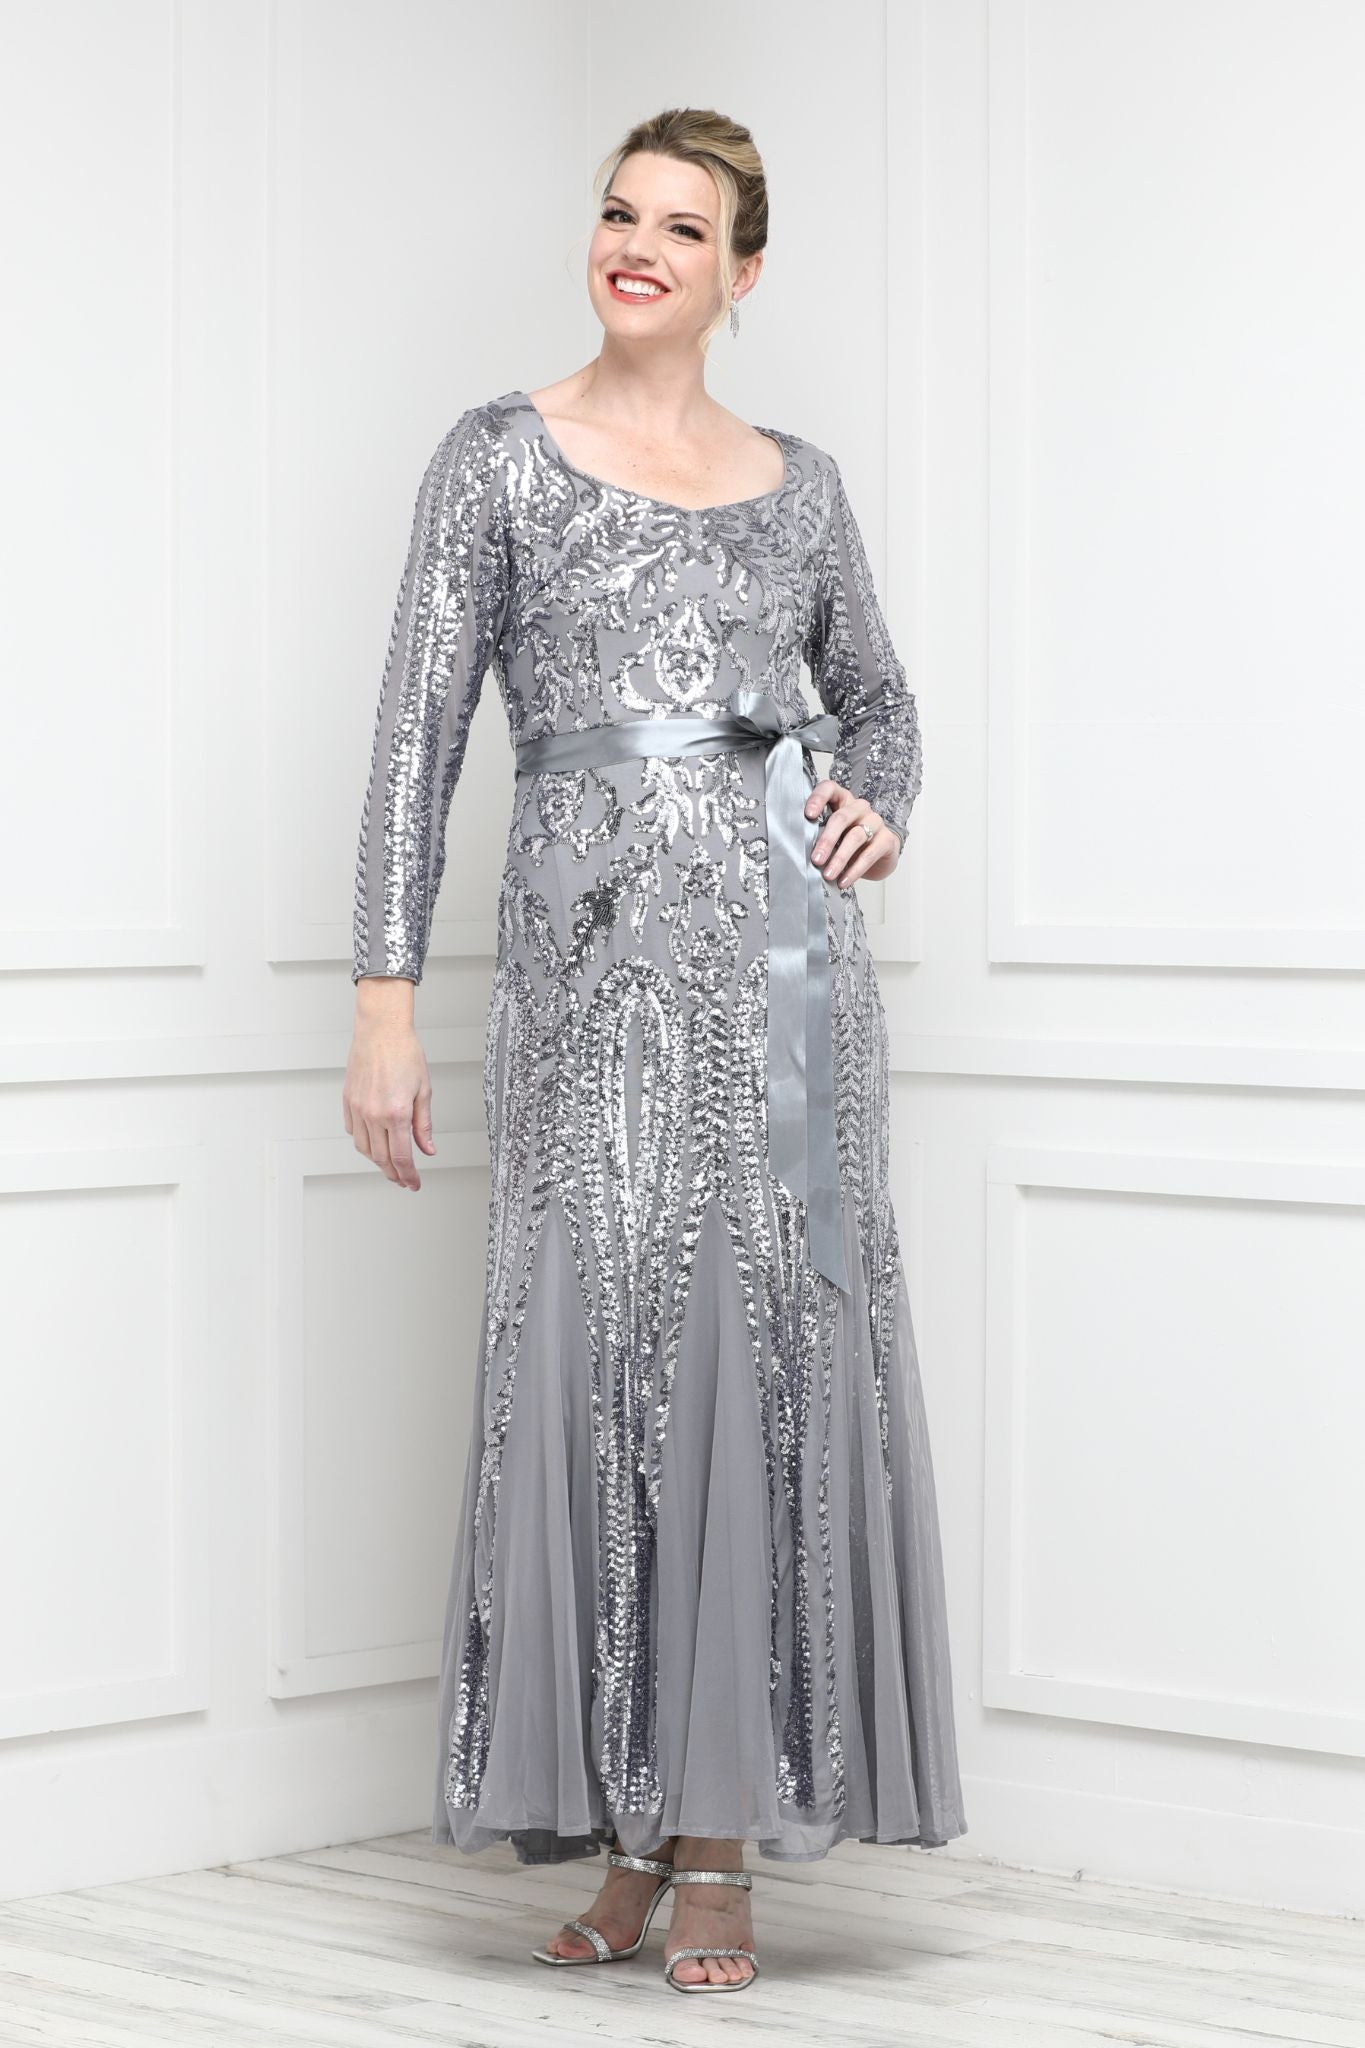 Silver Mermaid Halter Prom Dress With Lace Applique, Beaded Backless  Design, And Sweep Train For Modest Evening Parties From Topfashion_dress,  $123.02 | DHgate.Com